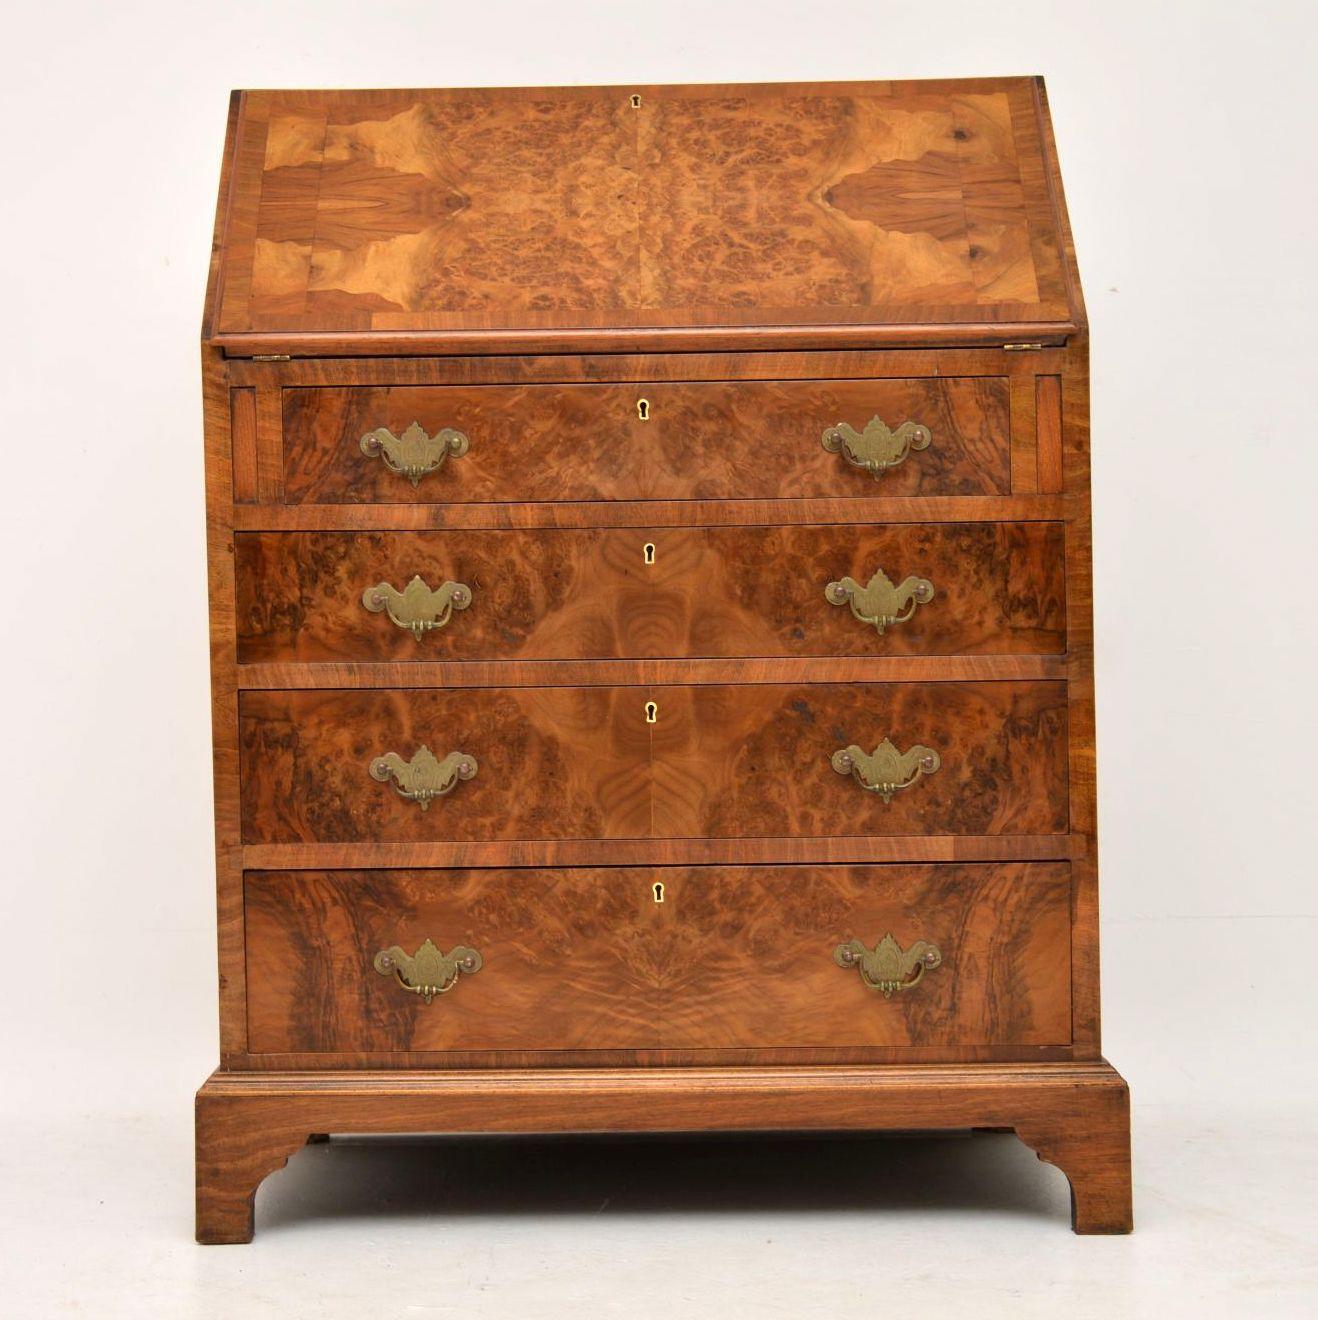 Antique burr walnut bureau dating from circa 1910s-1920s period and in good condition. It’s high quality, having fine dovetails on the drawers and a nice interior. The top and slope are cross banded, while the drawers are all graduated in depth with